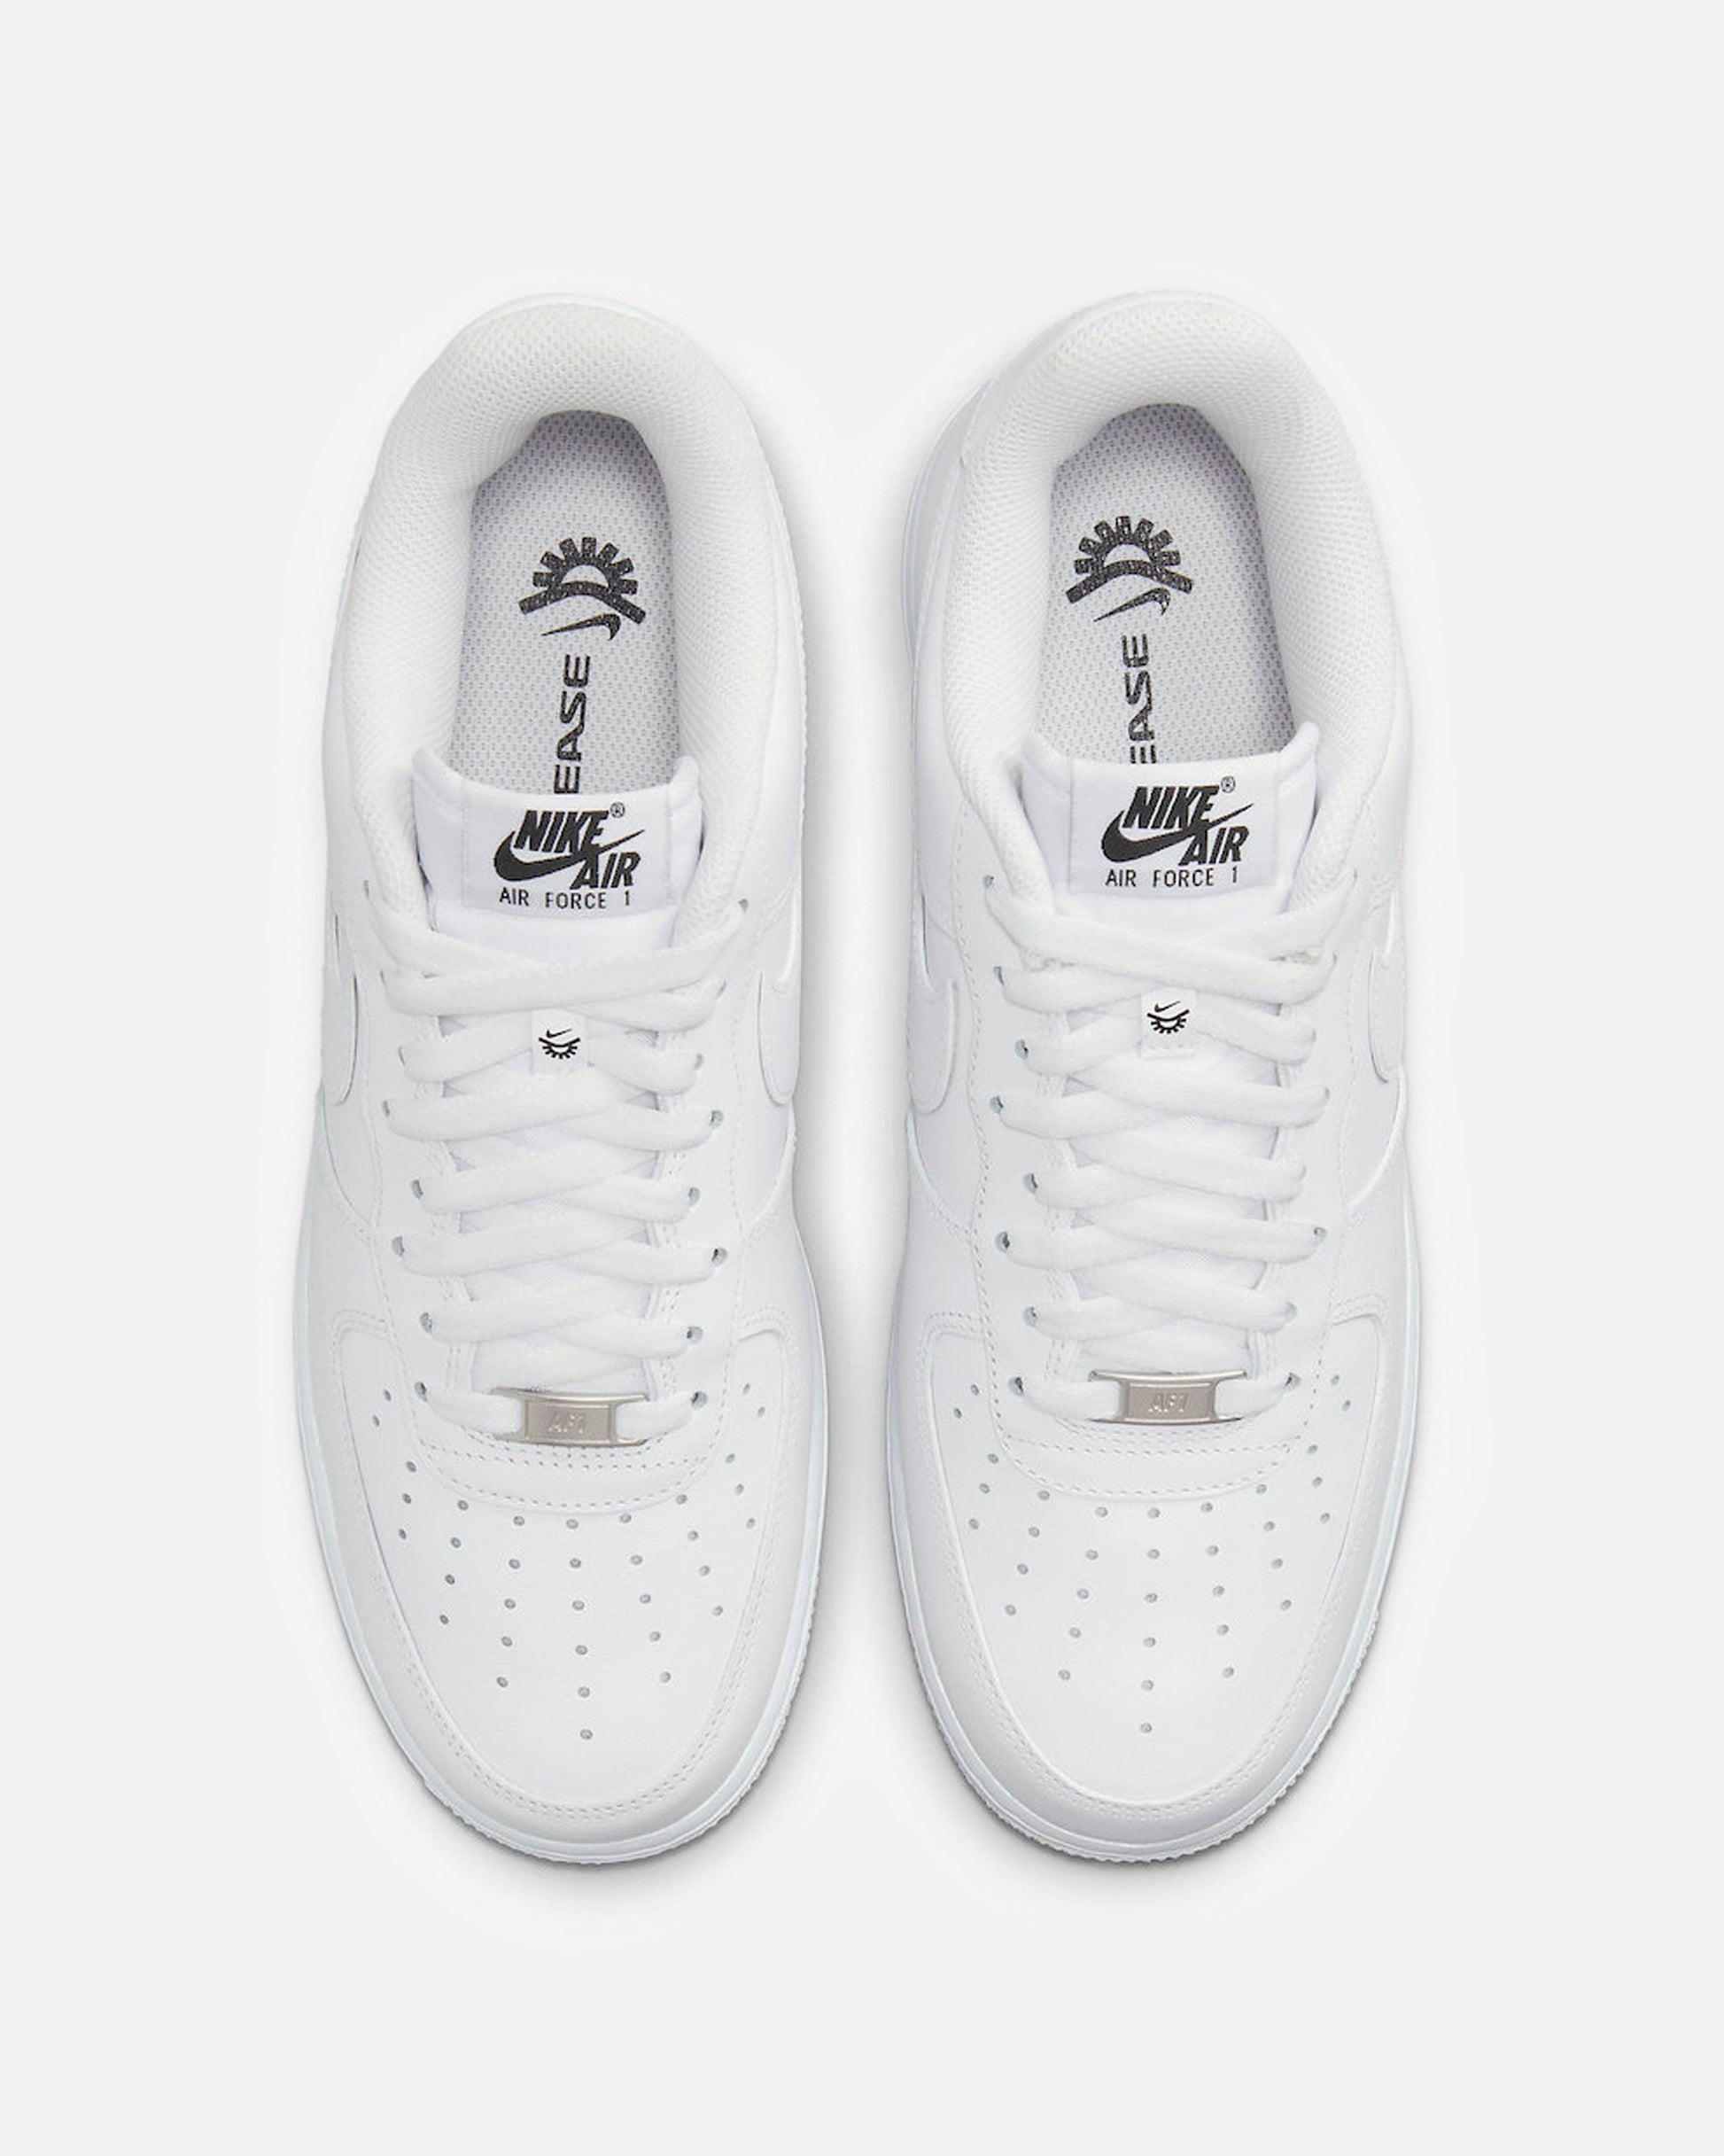 Nike Men's Shoes Air Force 1 '07 Flyease 'White'